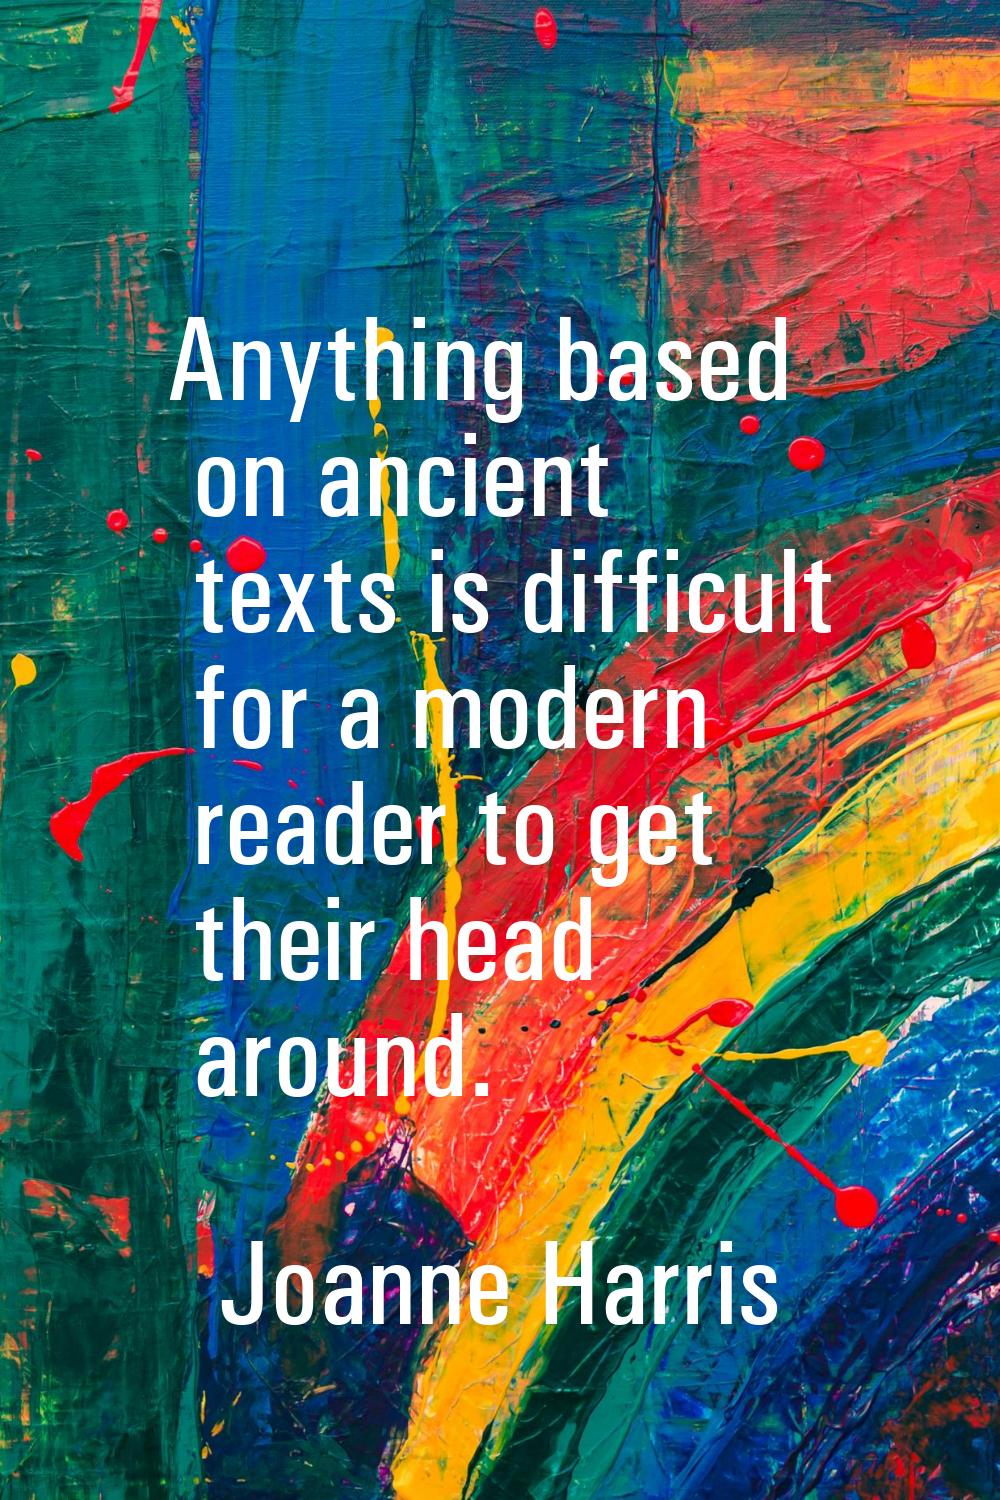 Anything based on ancient texts is difficult for a modern reader to get their head around.